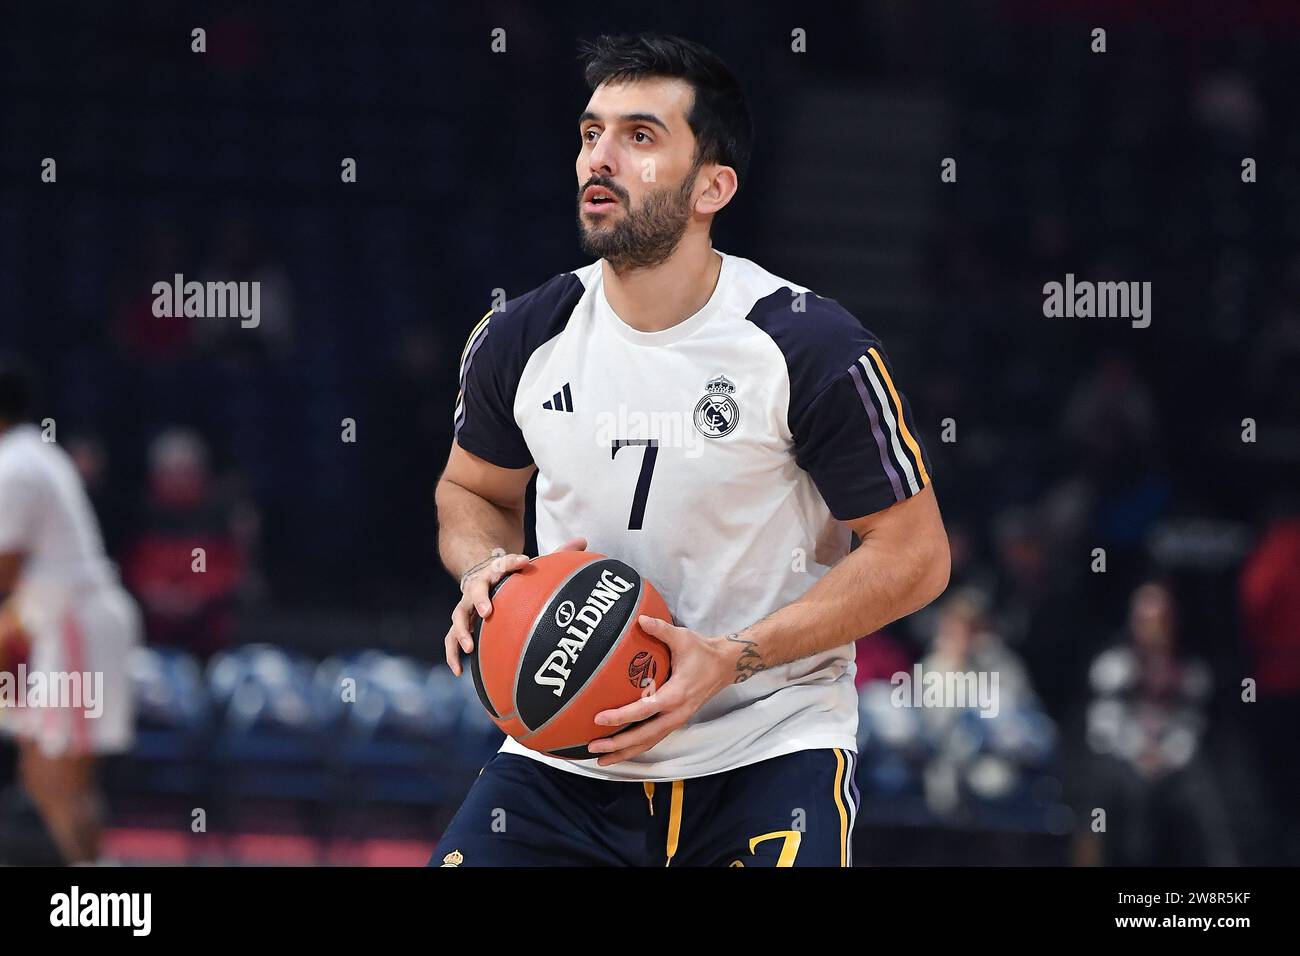 Belgrade, Serbia, 19 December, 2023. Facundo Campazzo of Real Madrid warms up during the 2023/2024 Turkish Airlines EuroLeague match between Crvena Zvezda Meridianbet Belgrade and Real Madrid at Aleksandar Nikolic Hall in Belgrade, Serbia. December 19, 2023. Credit: Nikola Krstic/Alamy Stock Photo